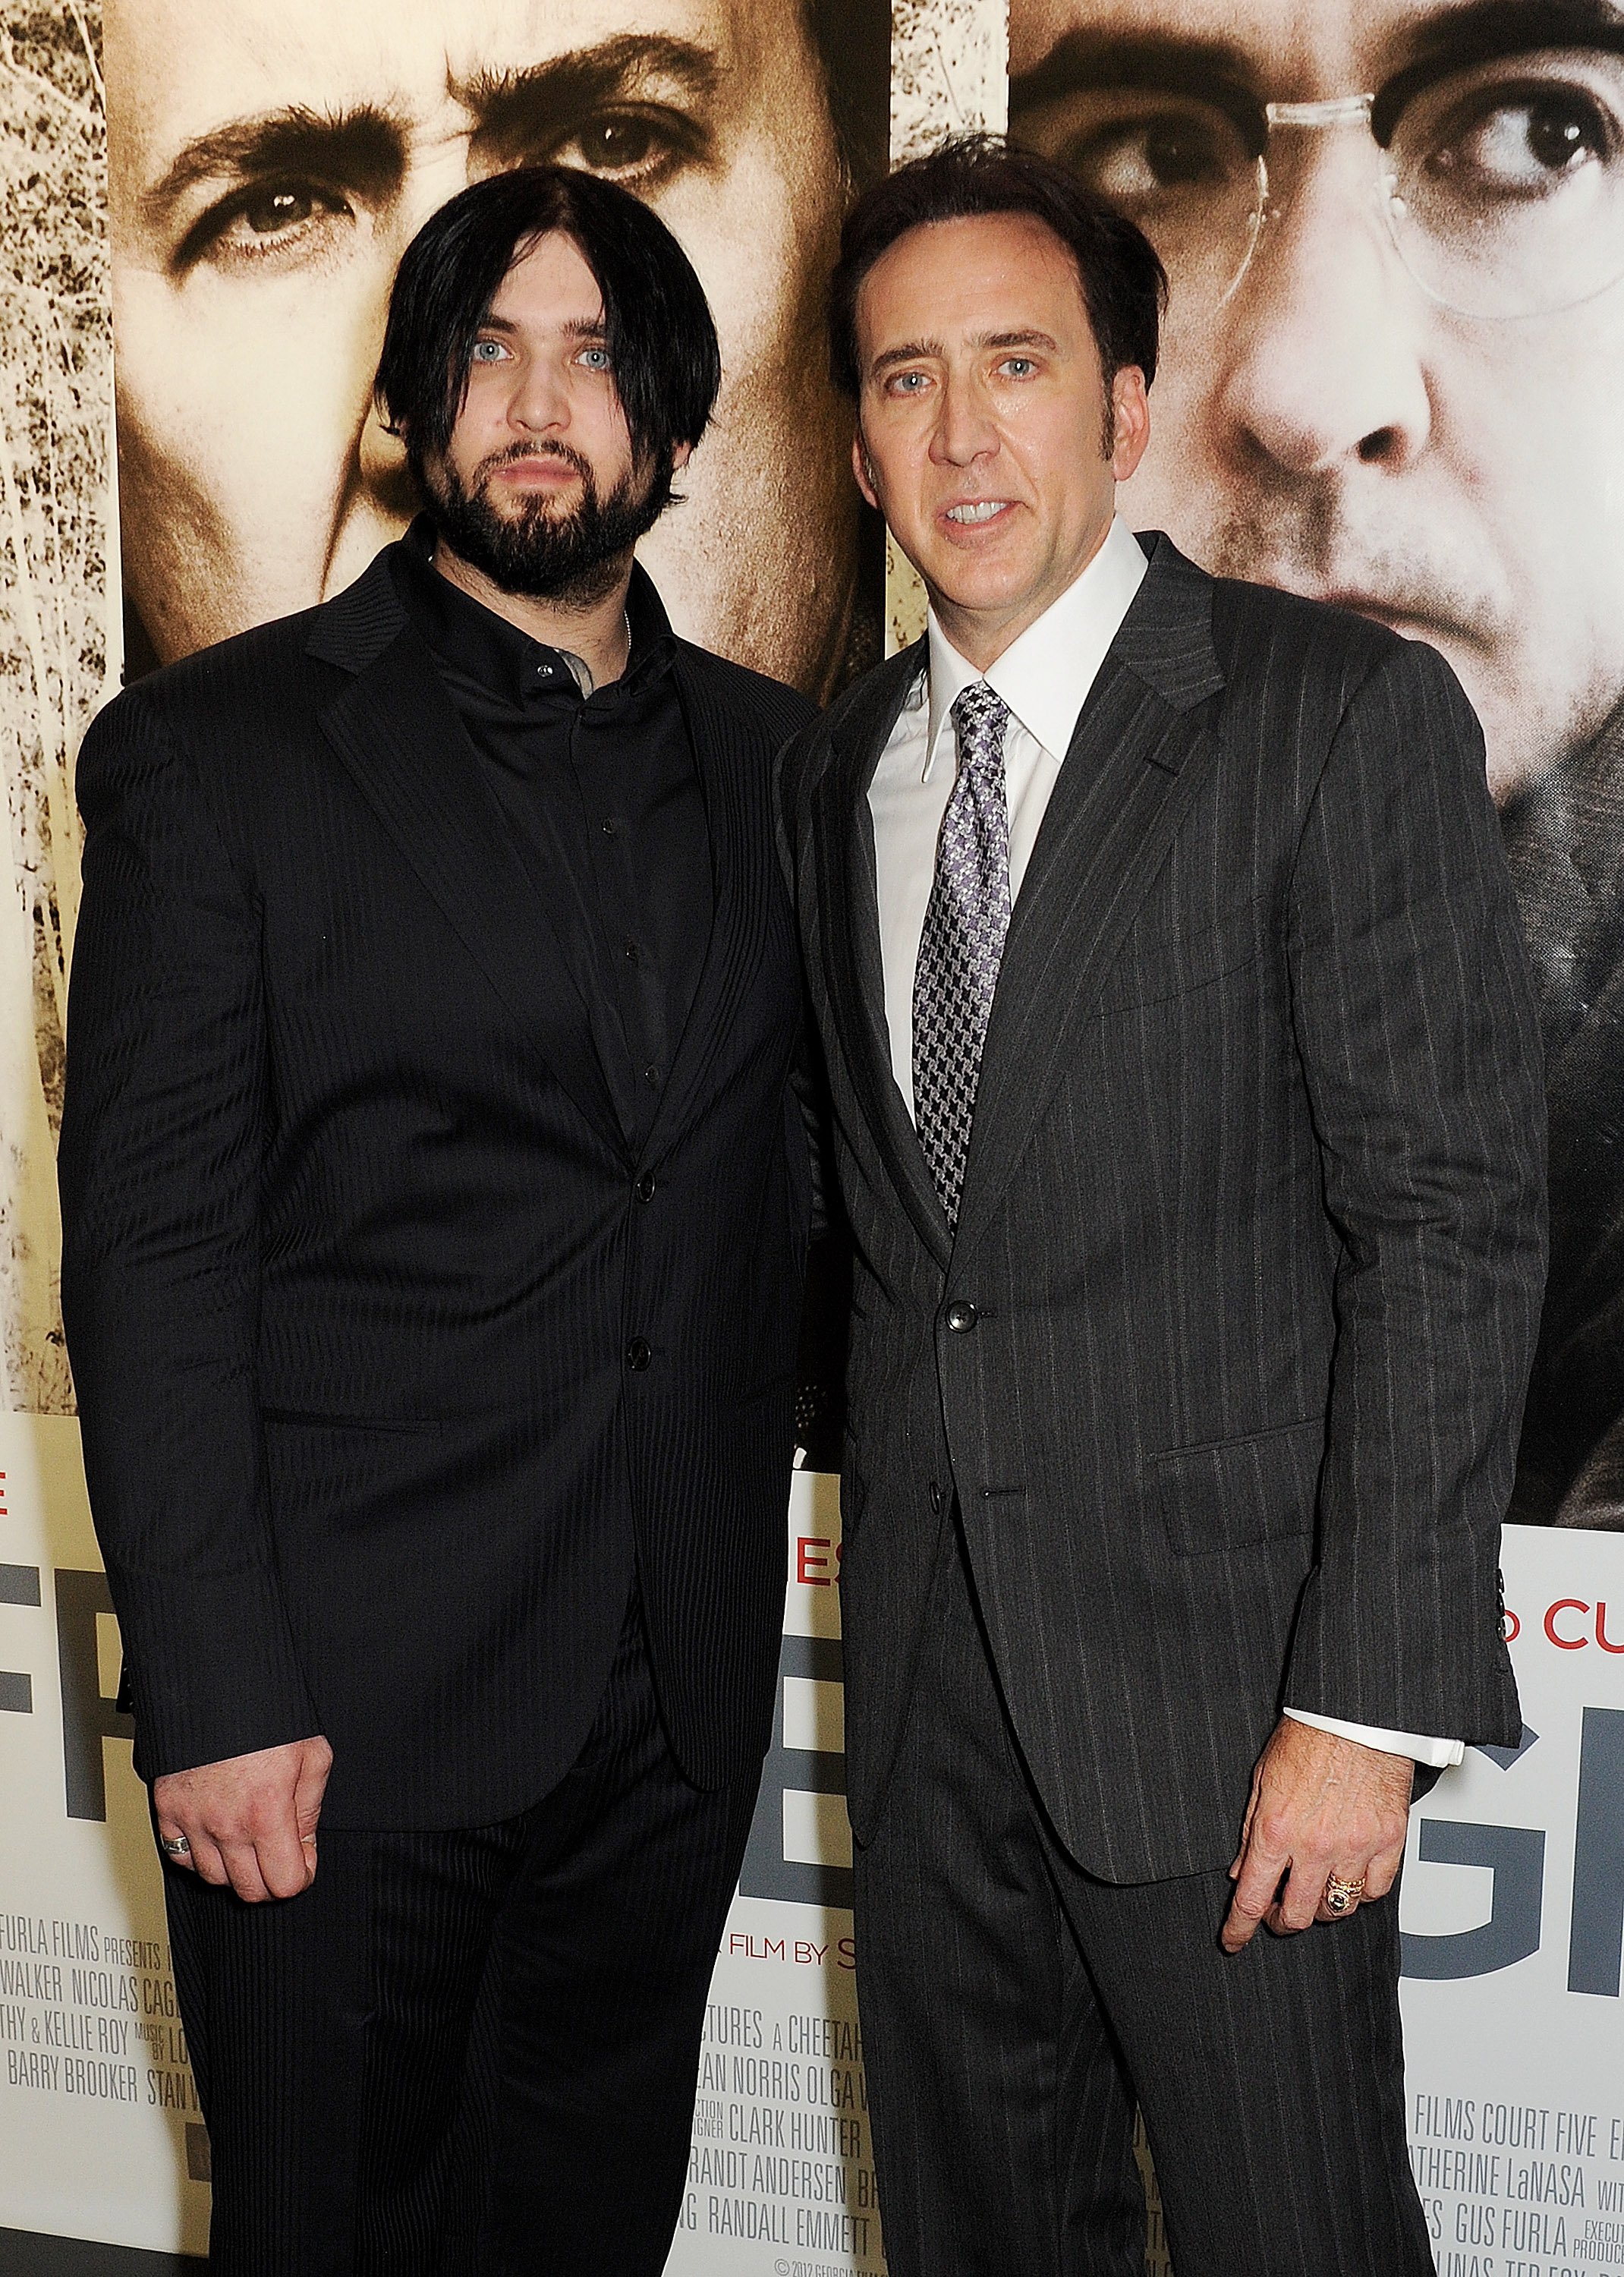 icolas Cage (R) and son Weston attend the UK Premiere of 'The Frozen Ground' at Vue West End on July 17, 2013 in London, England | Source: Getty Images 